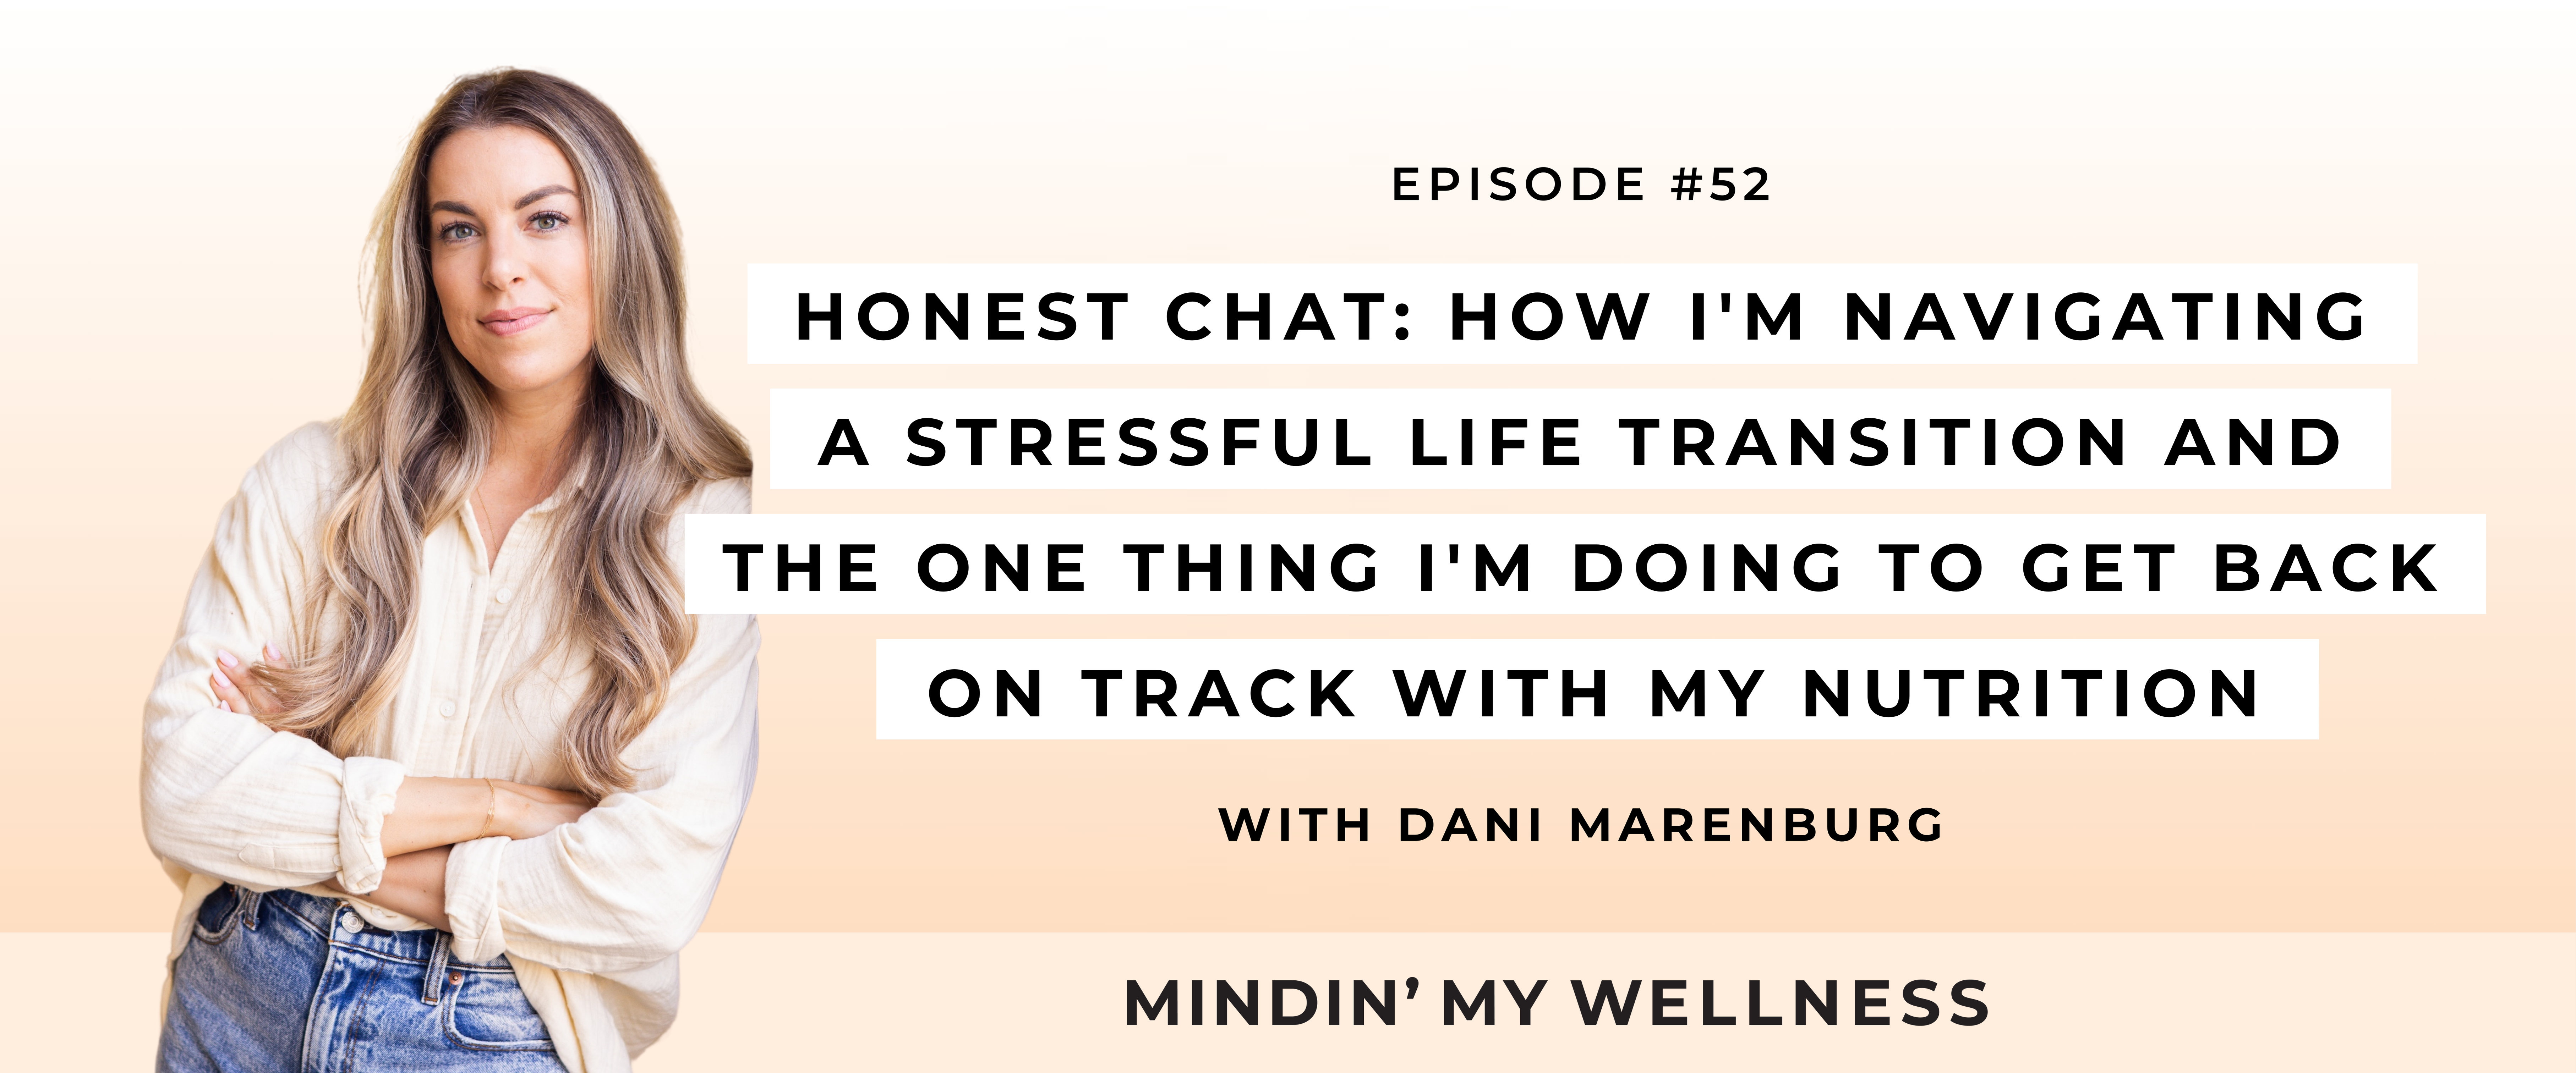 Honest Chat: How I'm Navigating a Stressful Life Transition and the ONE Thing I'm Doing to Get Back On Track With My Nutrition